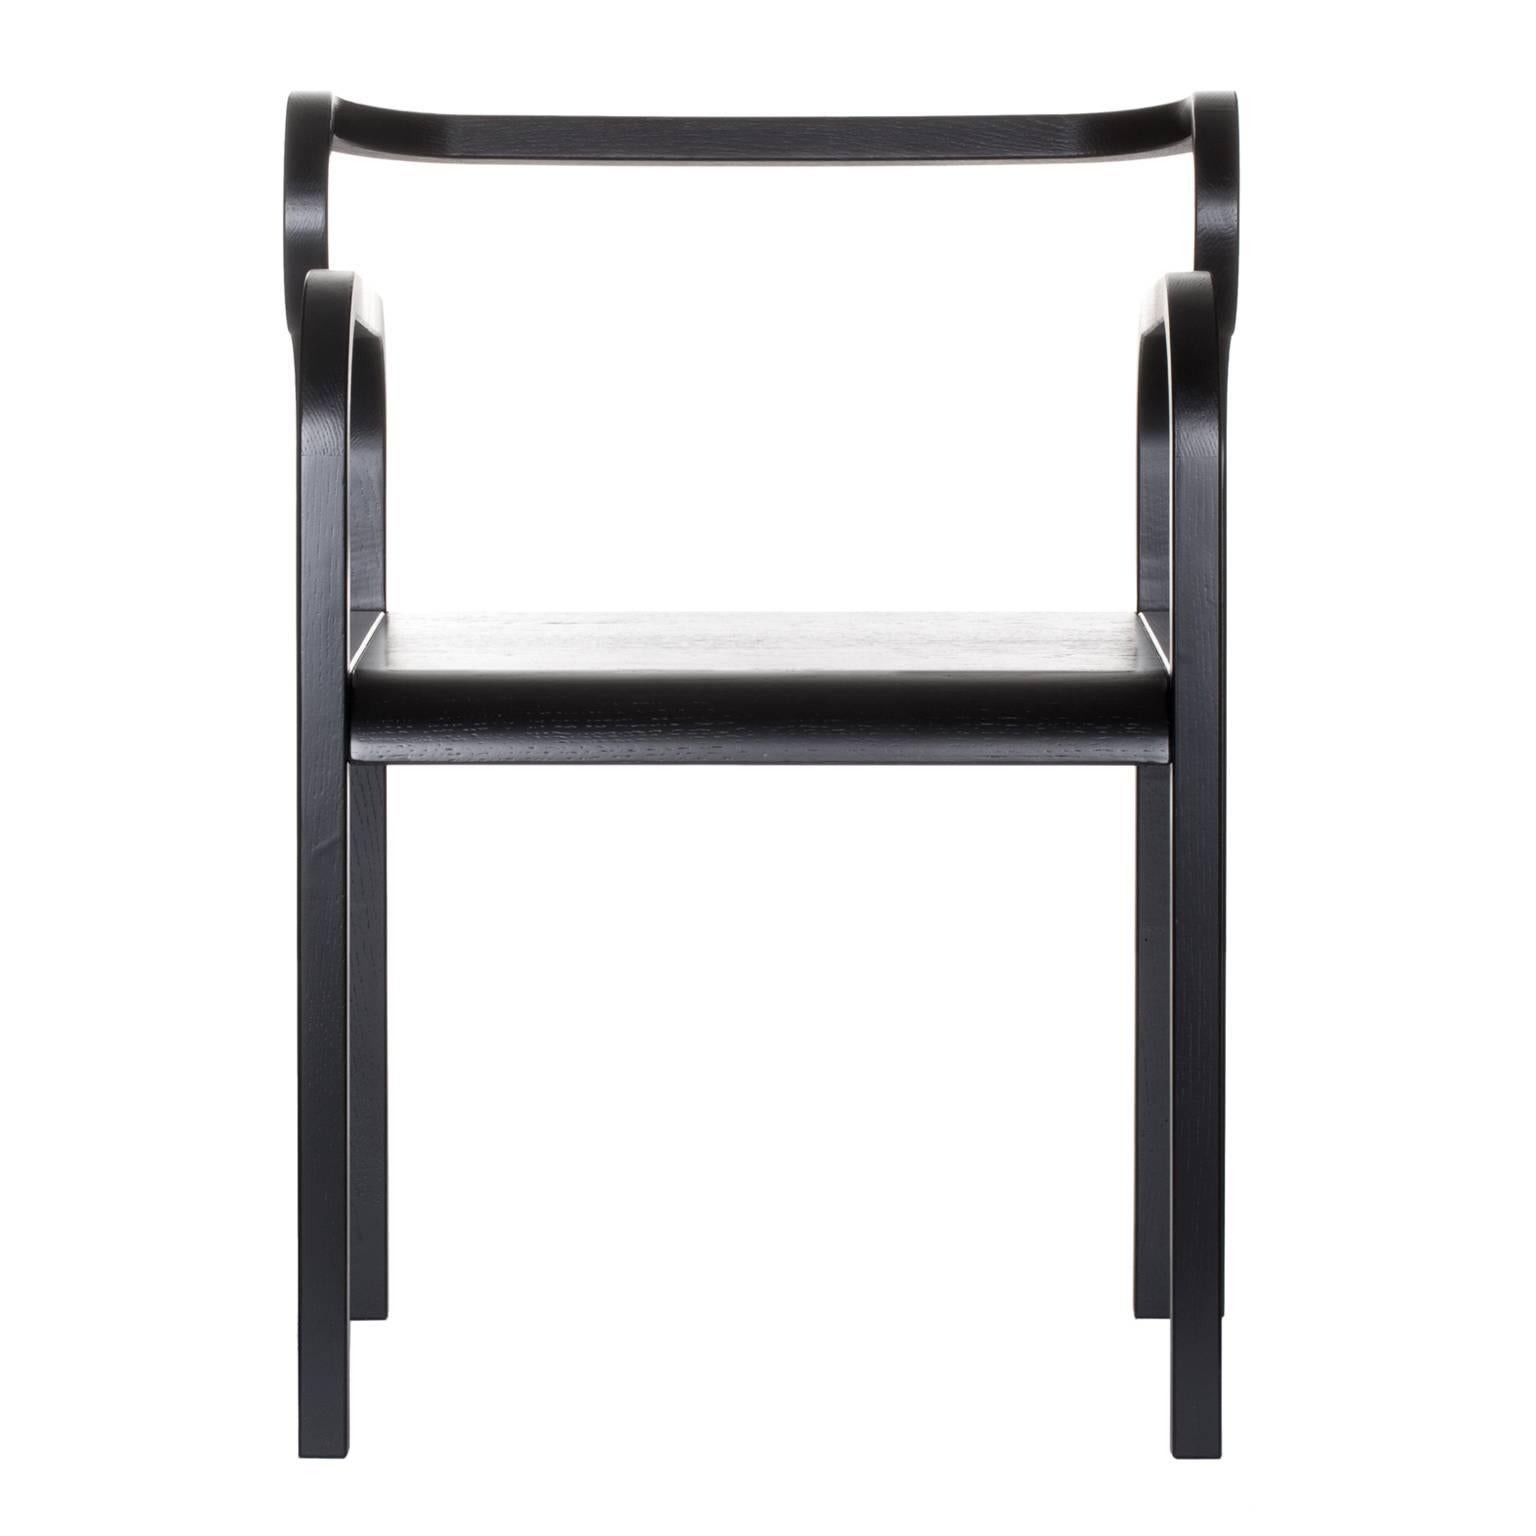 Odette Curvy Dining Chair with armrests in Black Solid Oak Wood by Fred&Juul For Sale